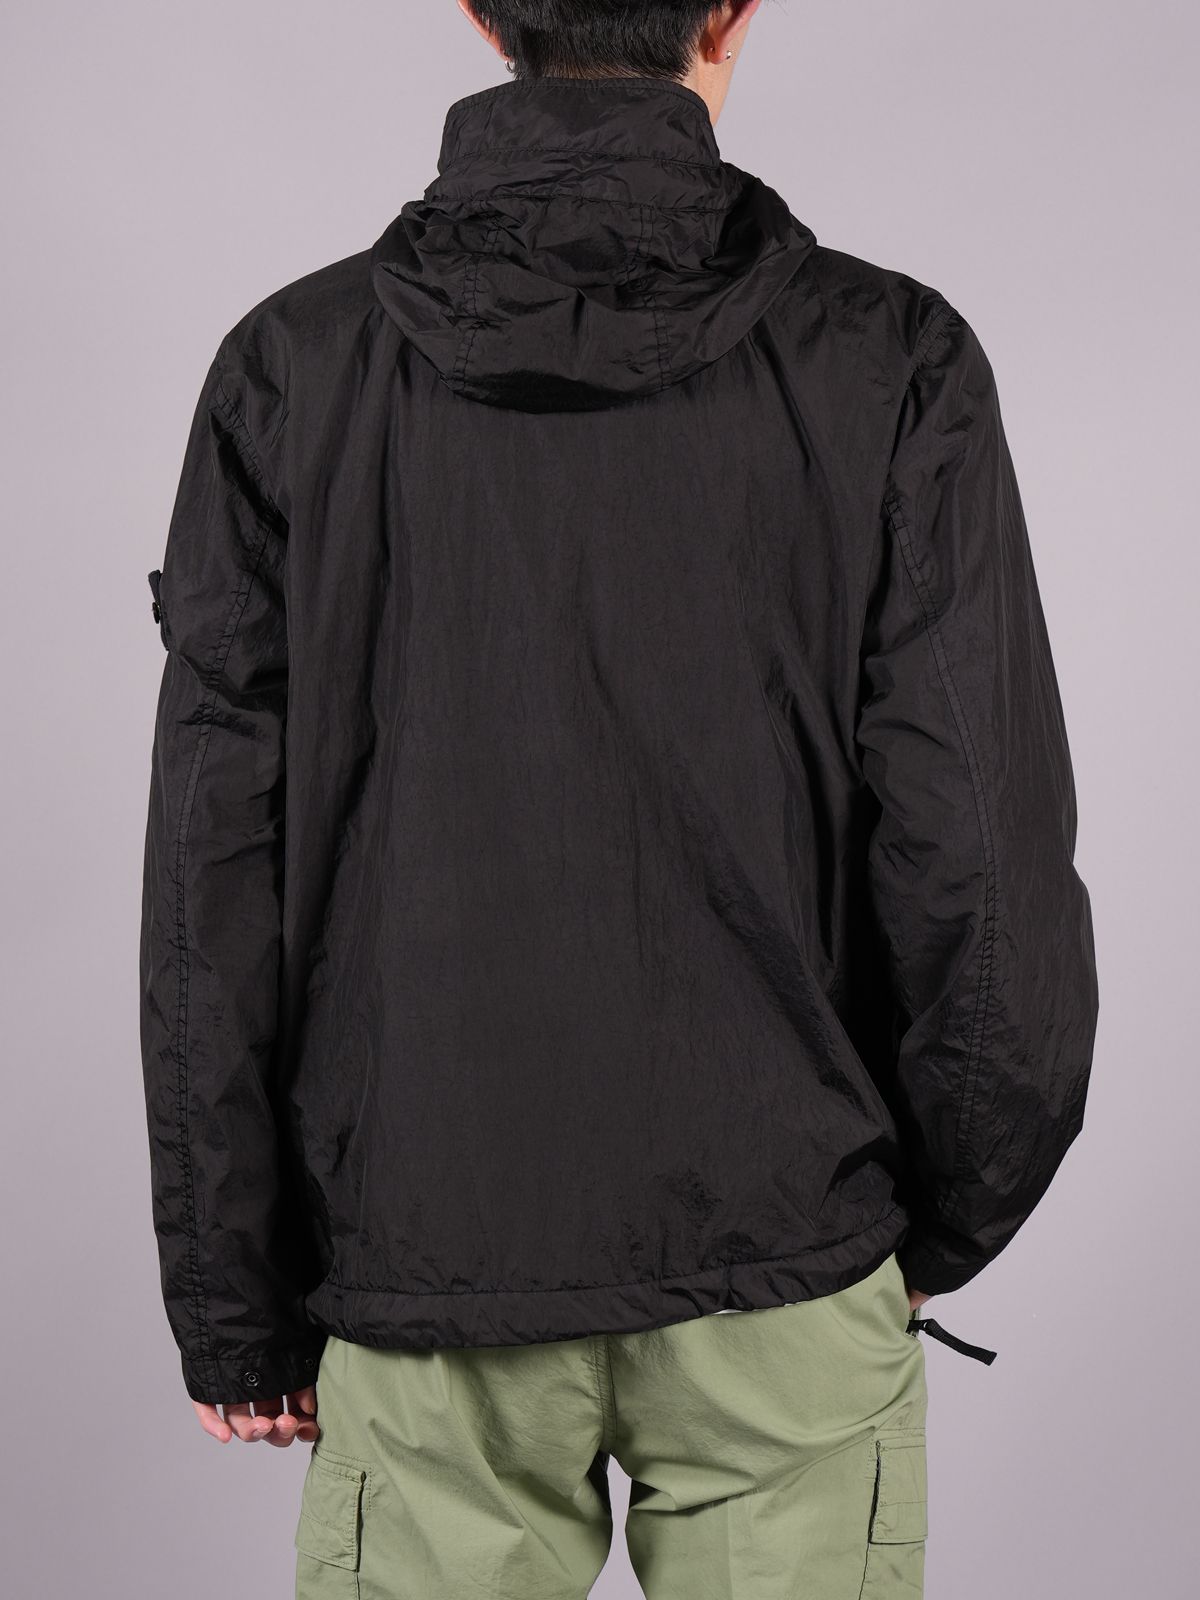 STONE ISLAND - 【ラスト1点】 40522 Crinkle Reps NY Hooded 